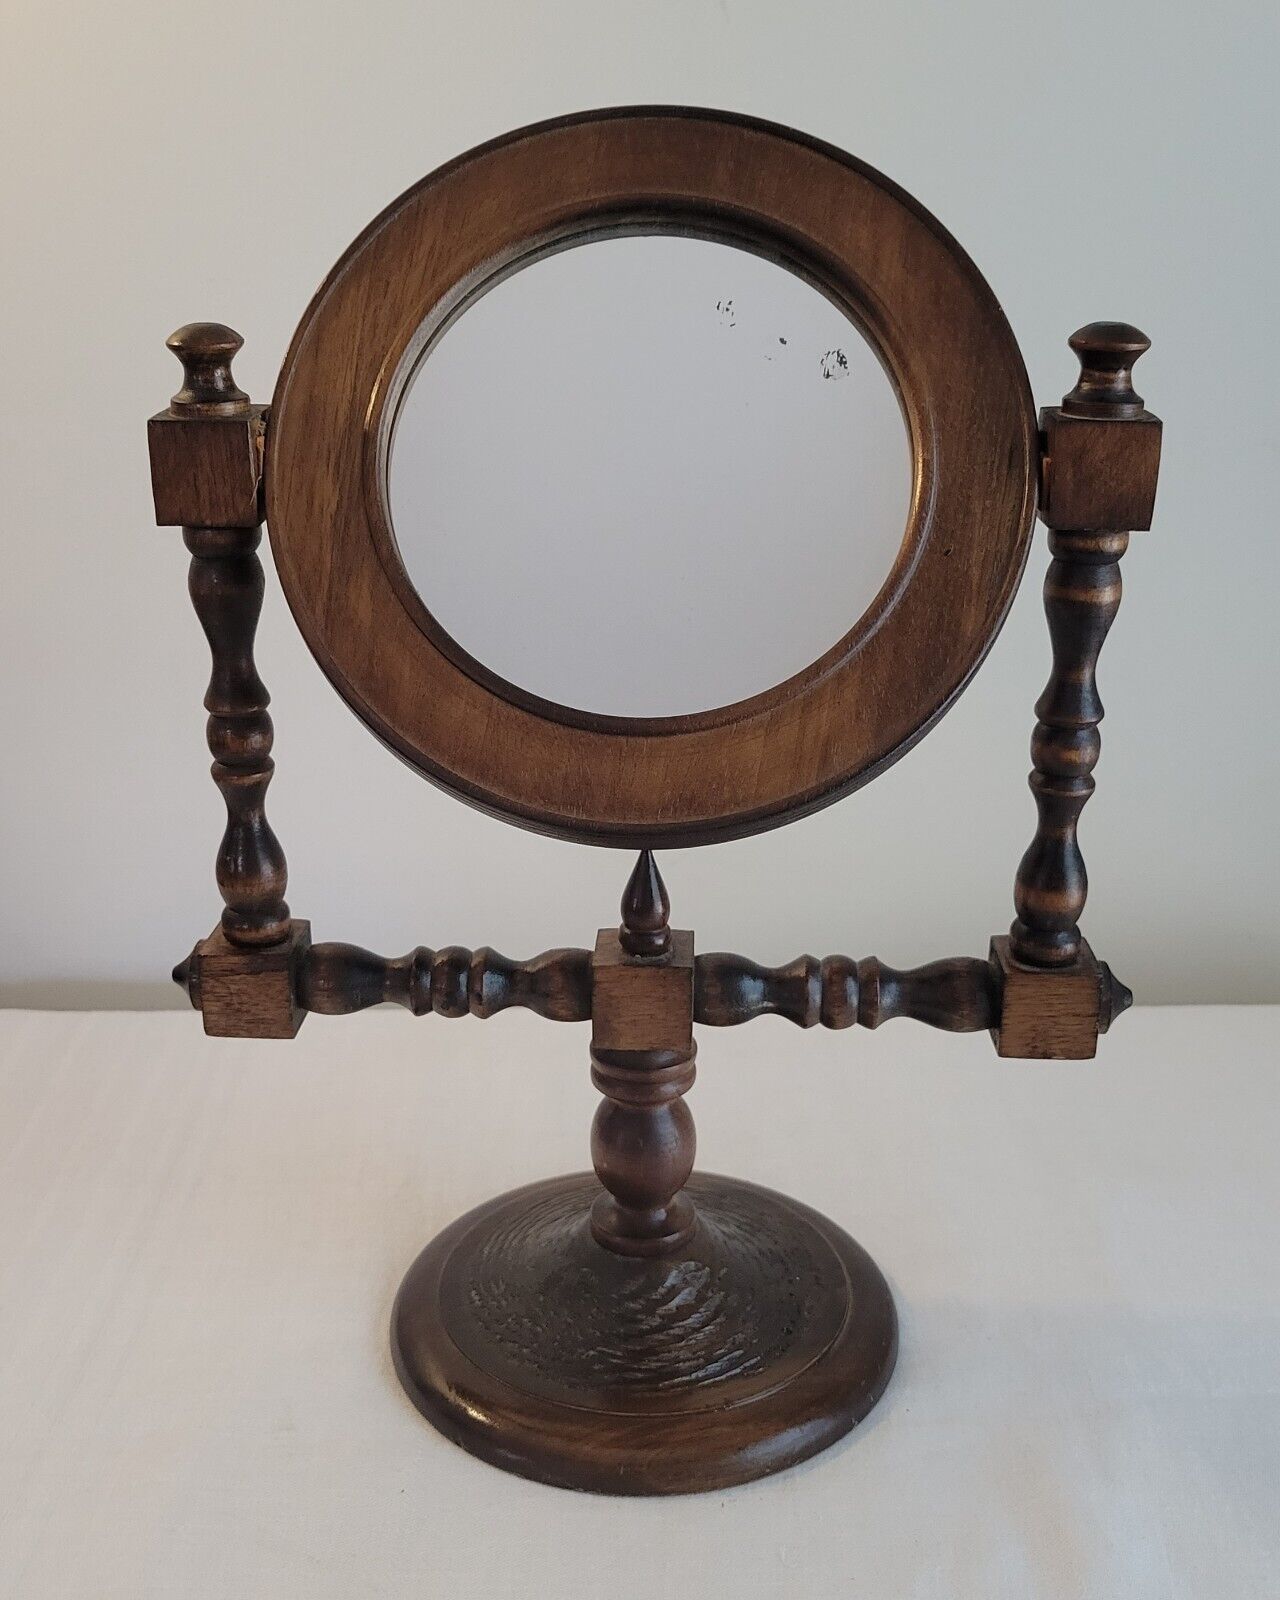 Vintage/Antique? Wood Shaving/Vanity Mirror 1920s-1930s Victorian-French Cottage